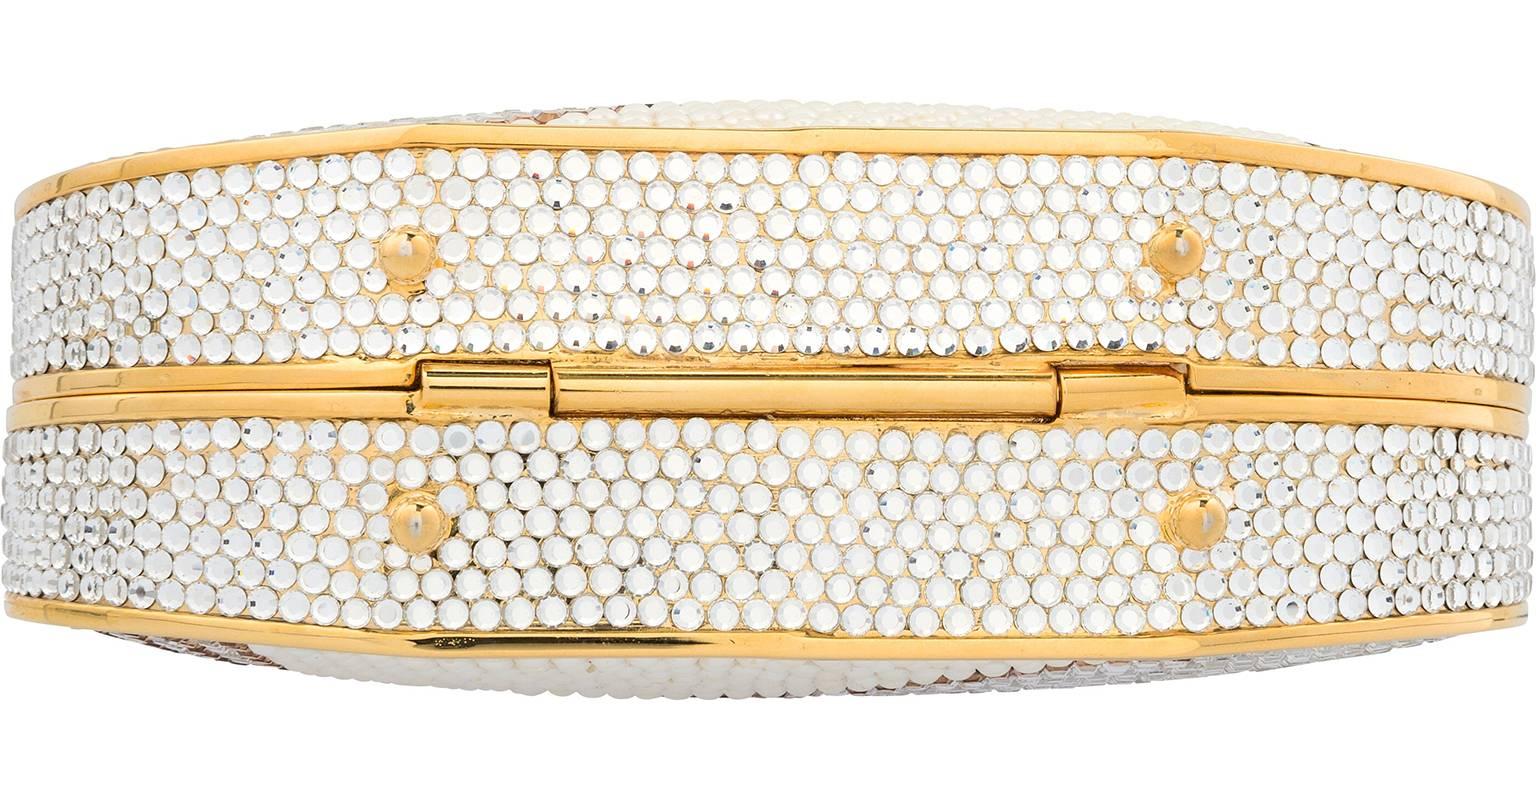 Judith Leiber Full Bead White & Gold Crystal Striped Minaudiere Bag In Excellent Condition For Sale In New York, NY